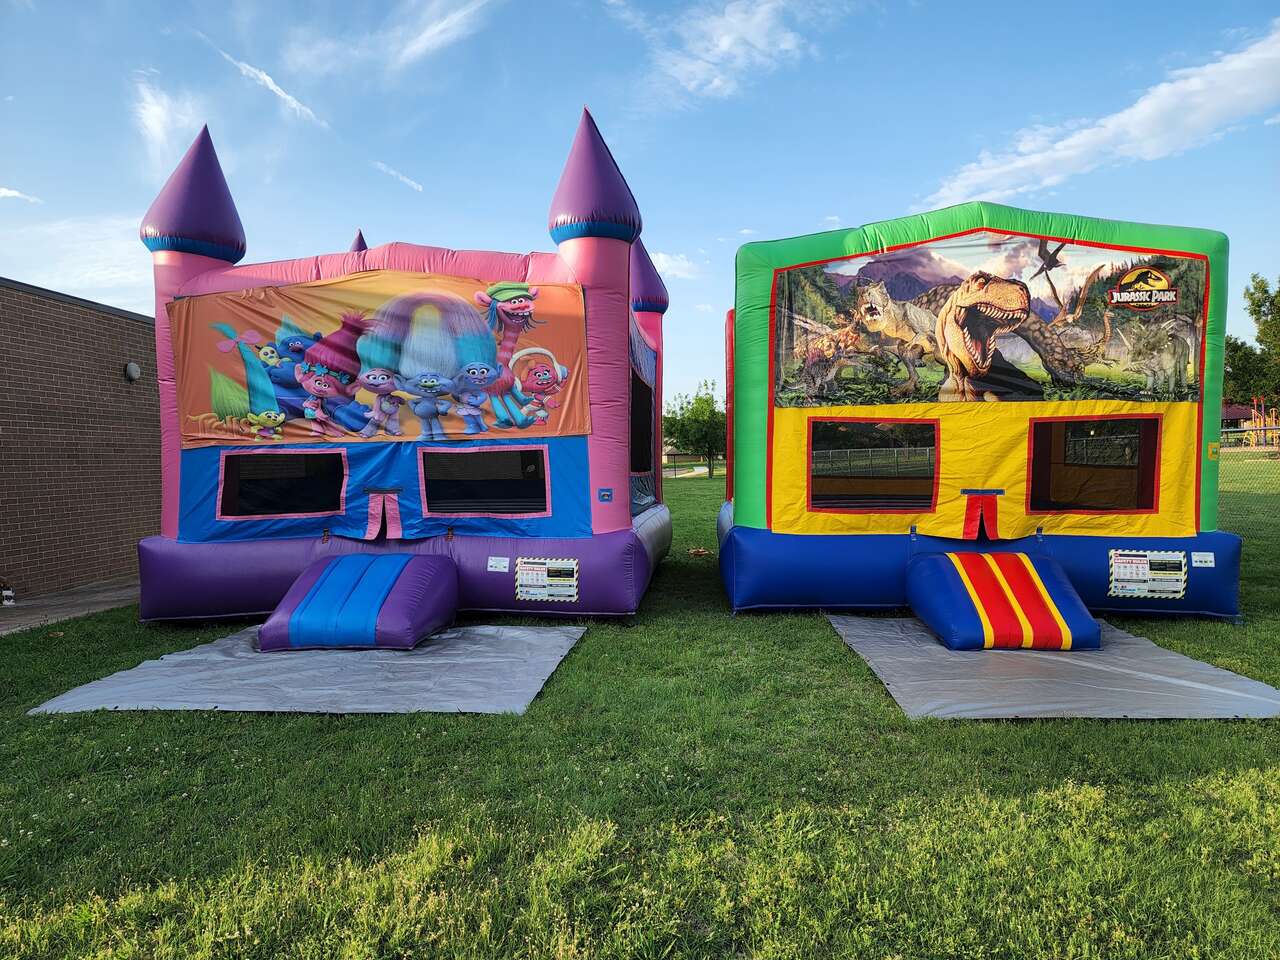 Exciting Options for a Bounce House in Edmond Oklahoma